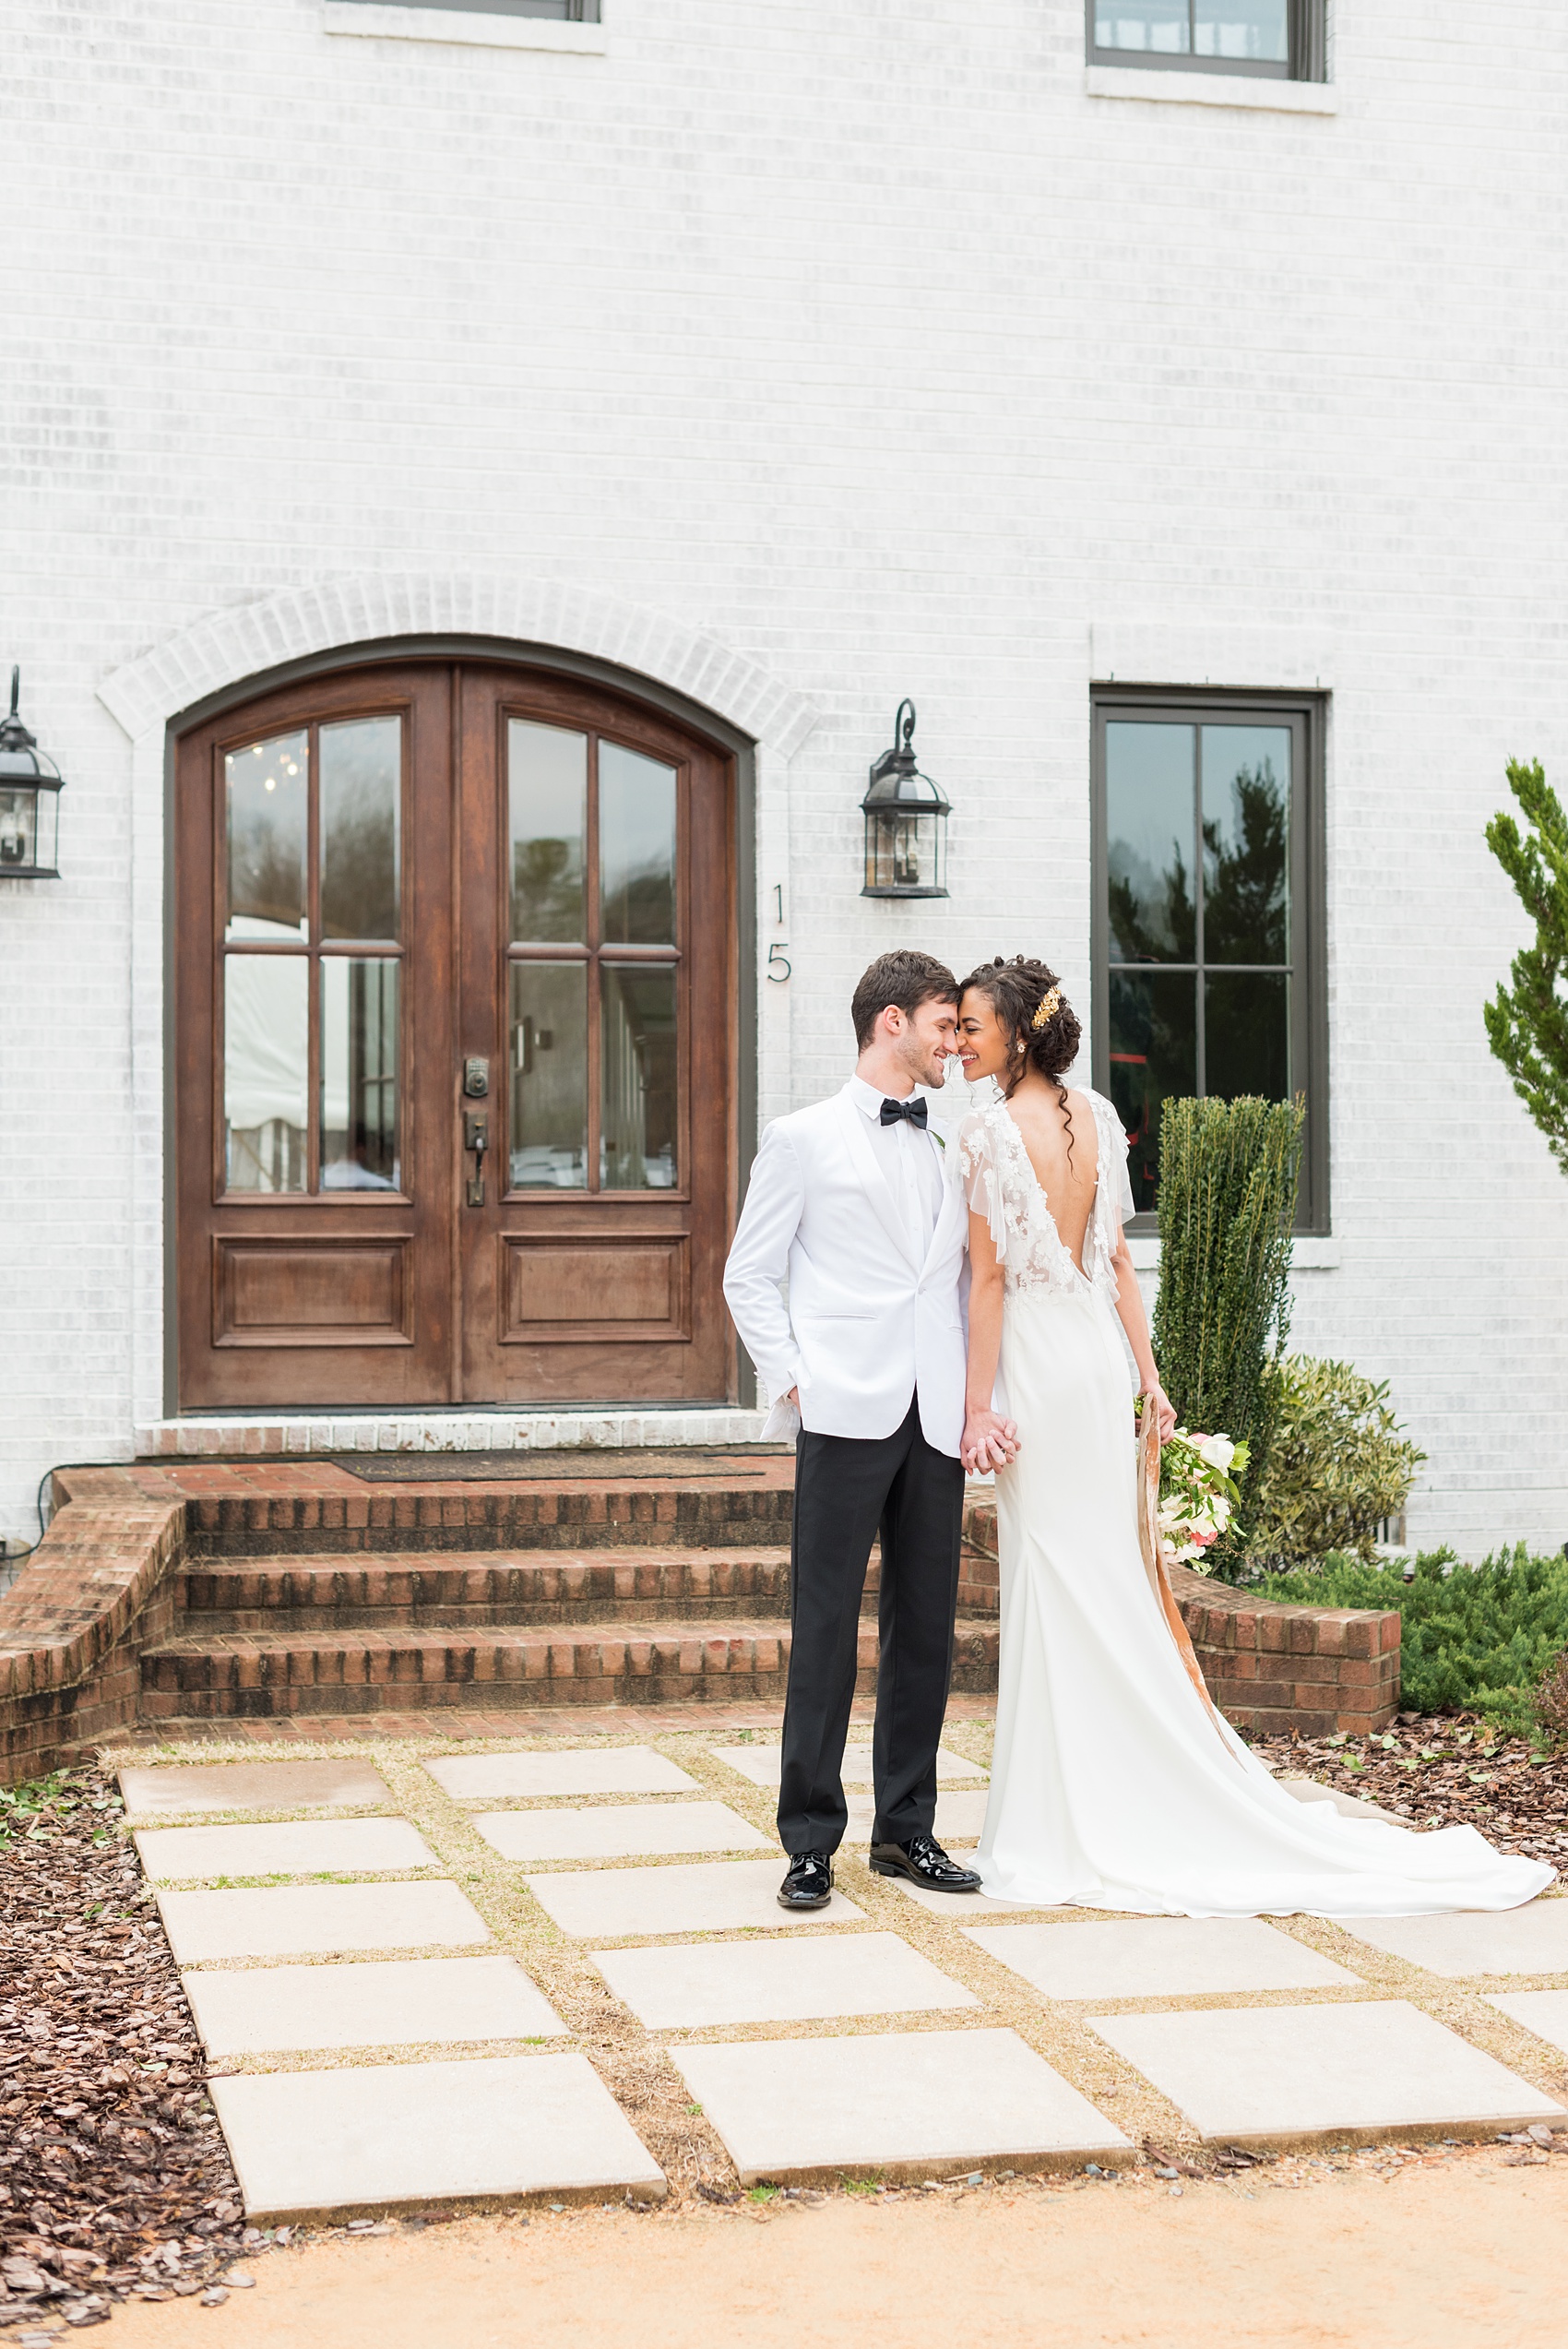 The Bradford NC Photos captured by Mikkel Paige Photography. This North Carolina Raleigh event venue has beautiful gardens and is perfect for outdoor or indoor ceremonies and receptions. Design by @vivalevent with a green, black and peach palette. #mikkelpaige #brideandgroom #Raleighweddingphotographer #raleighweddingvenues